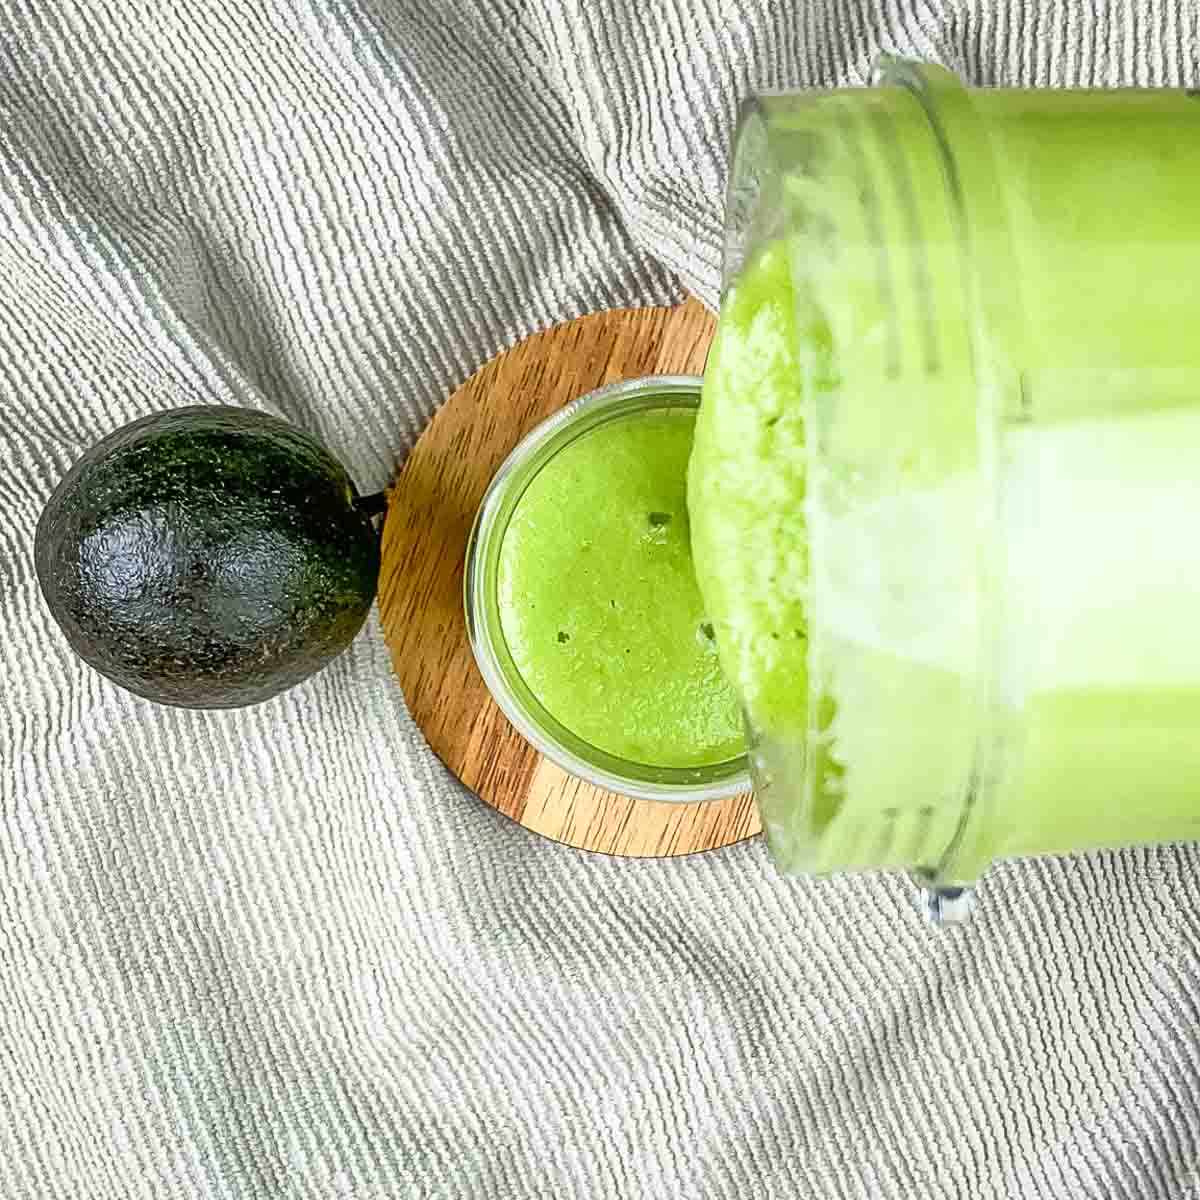 The thick green smoothie  being poured into a tall glass.